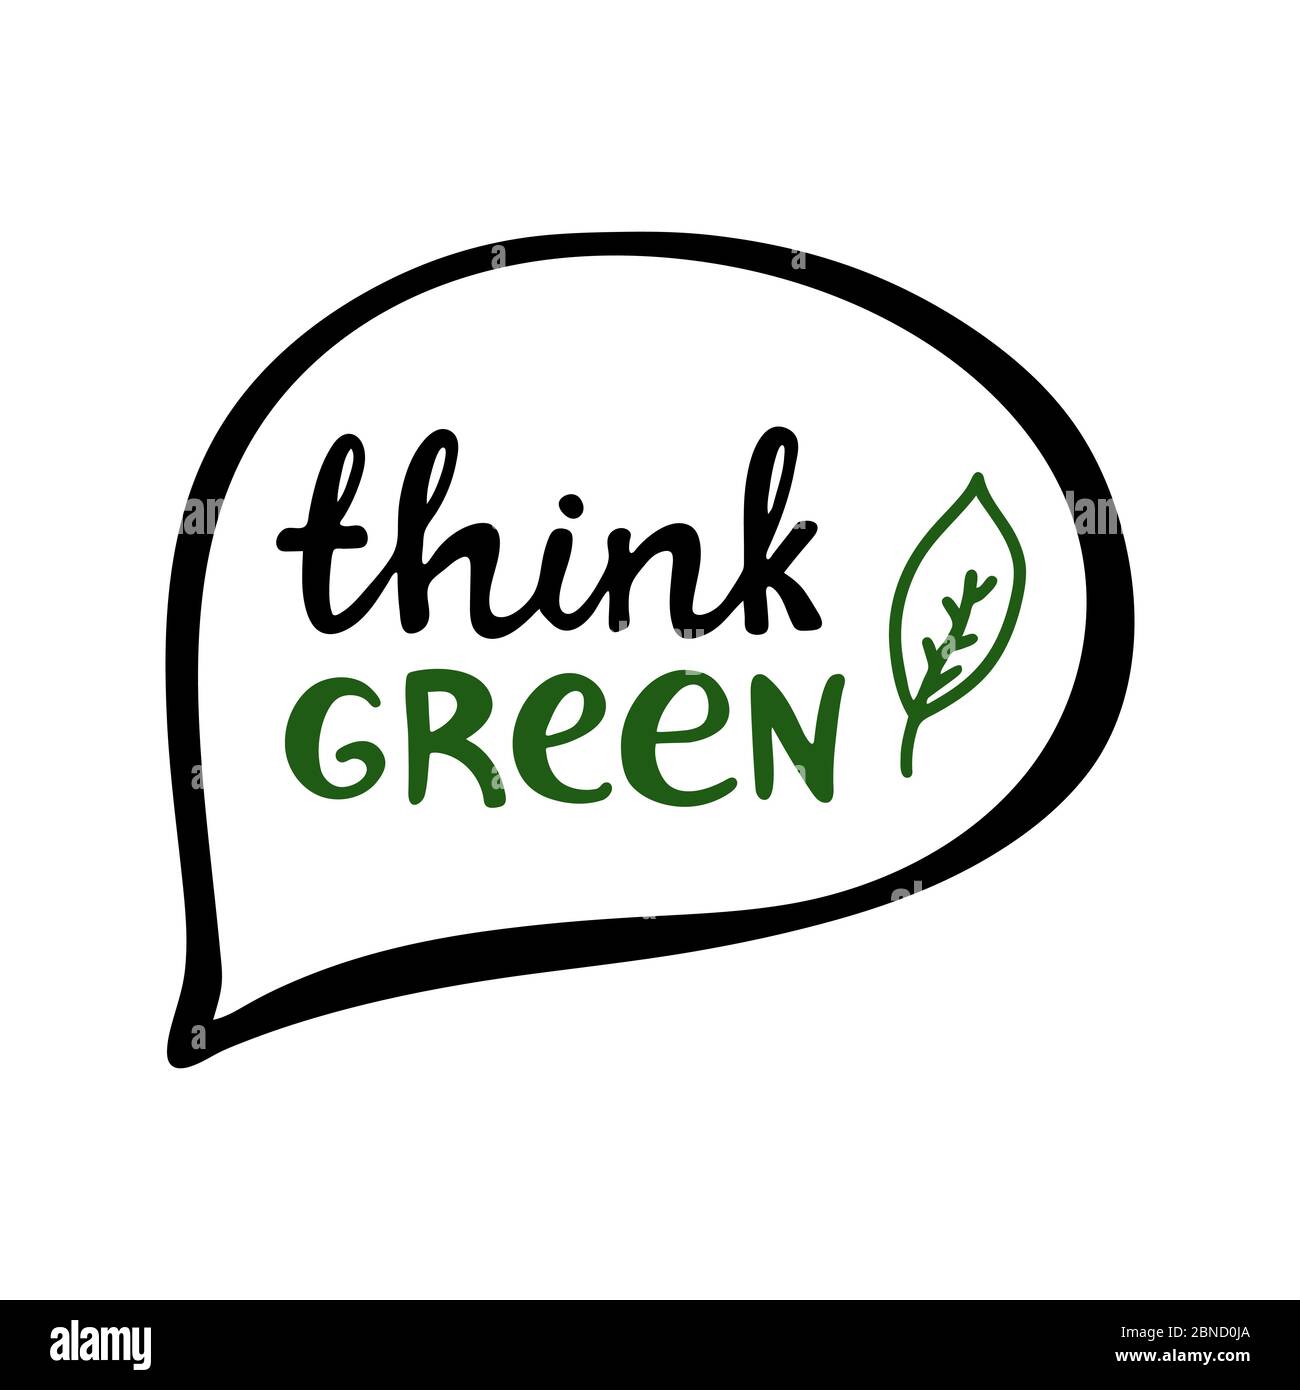 Think green. Handwritten ecological quote. Isolated on white background. Vector stock illustration. Stock Vector